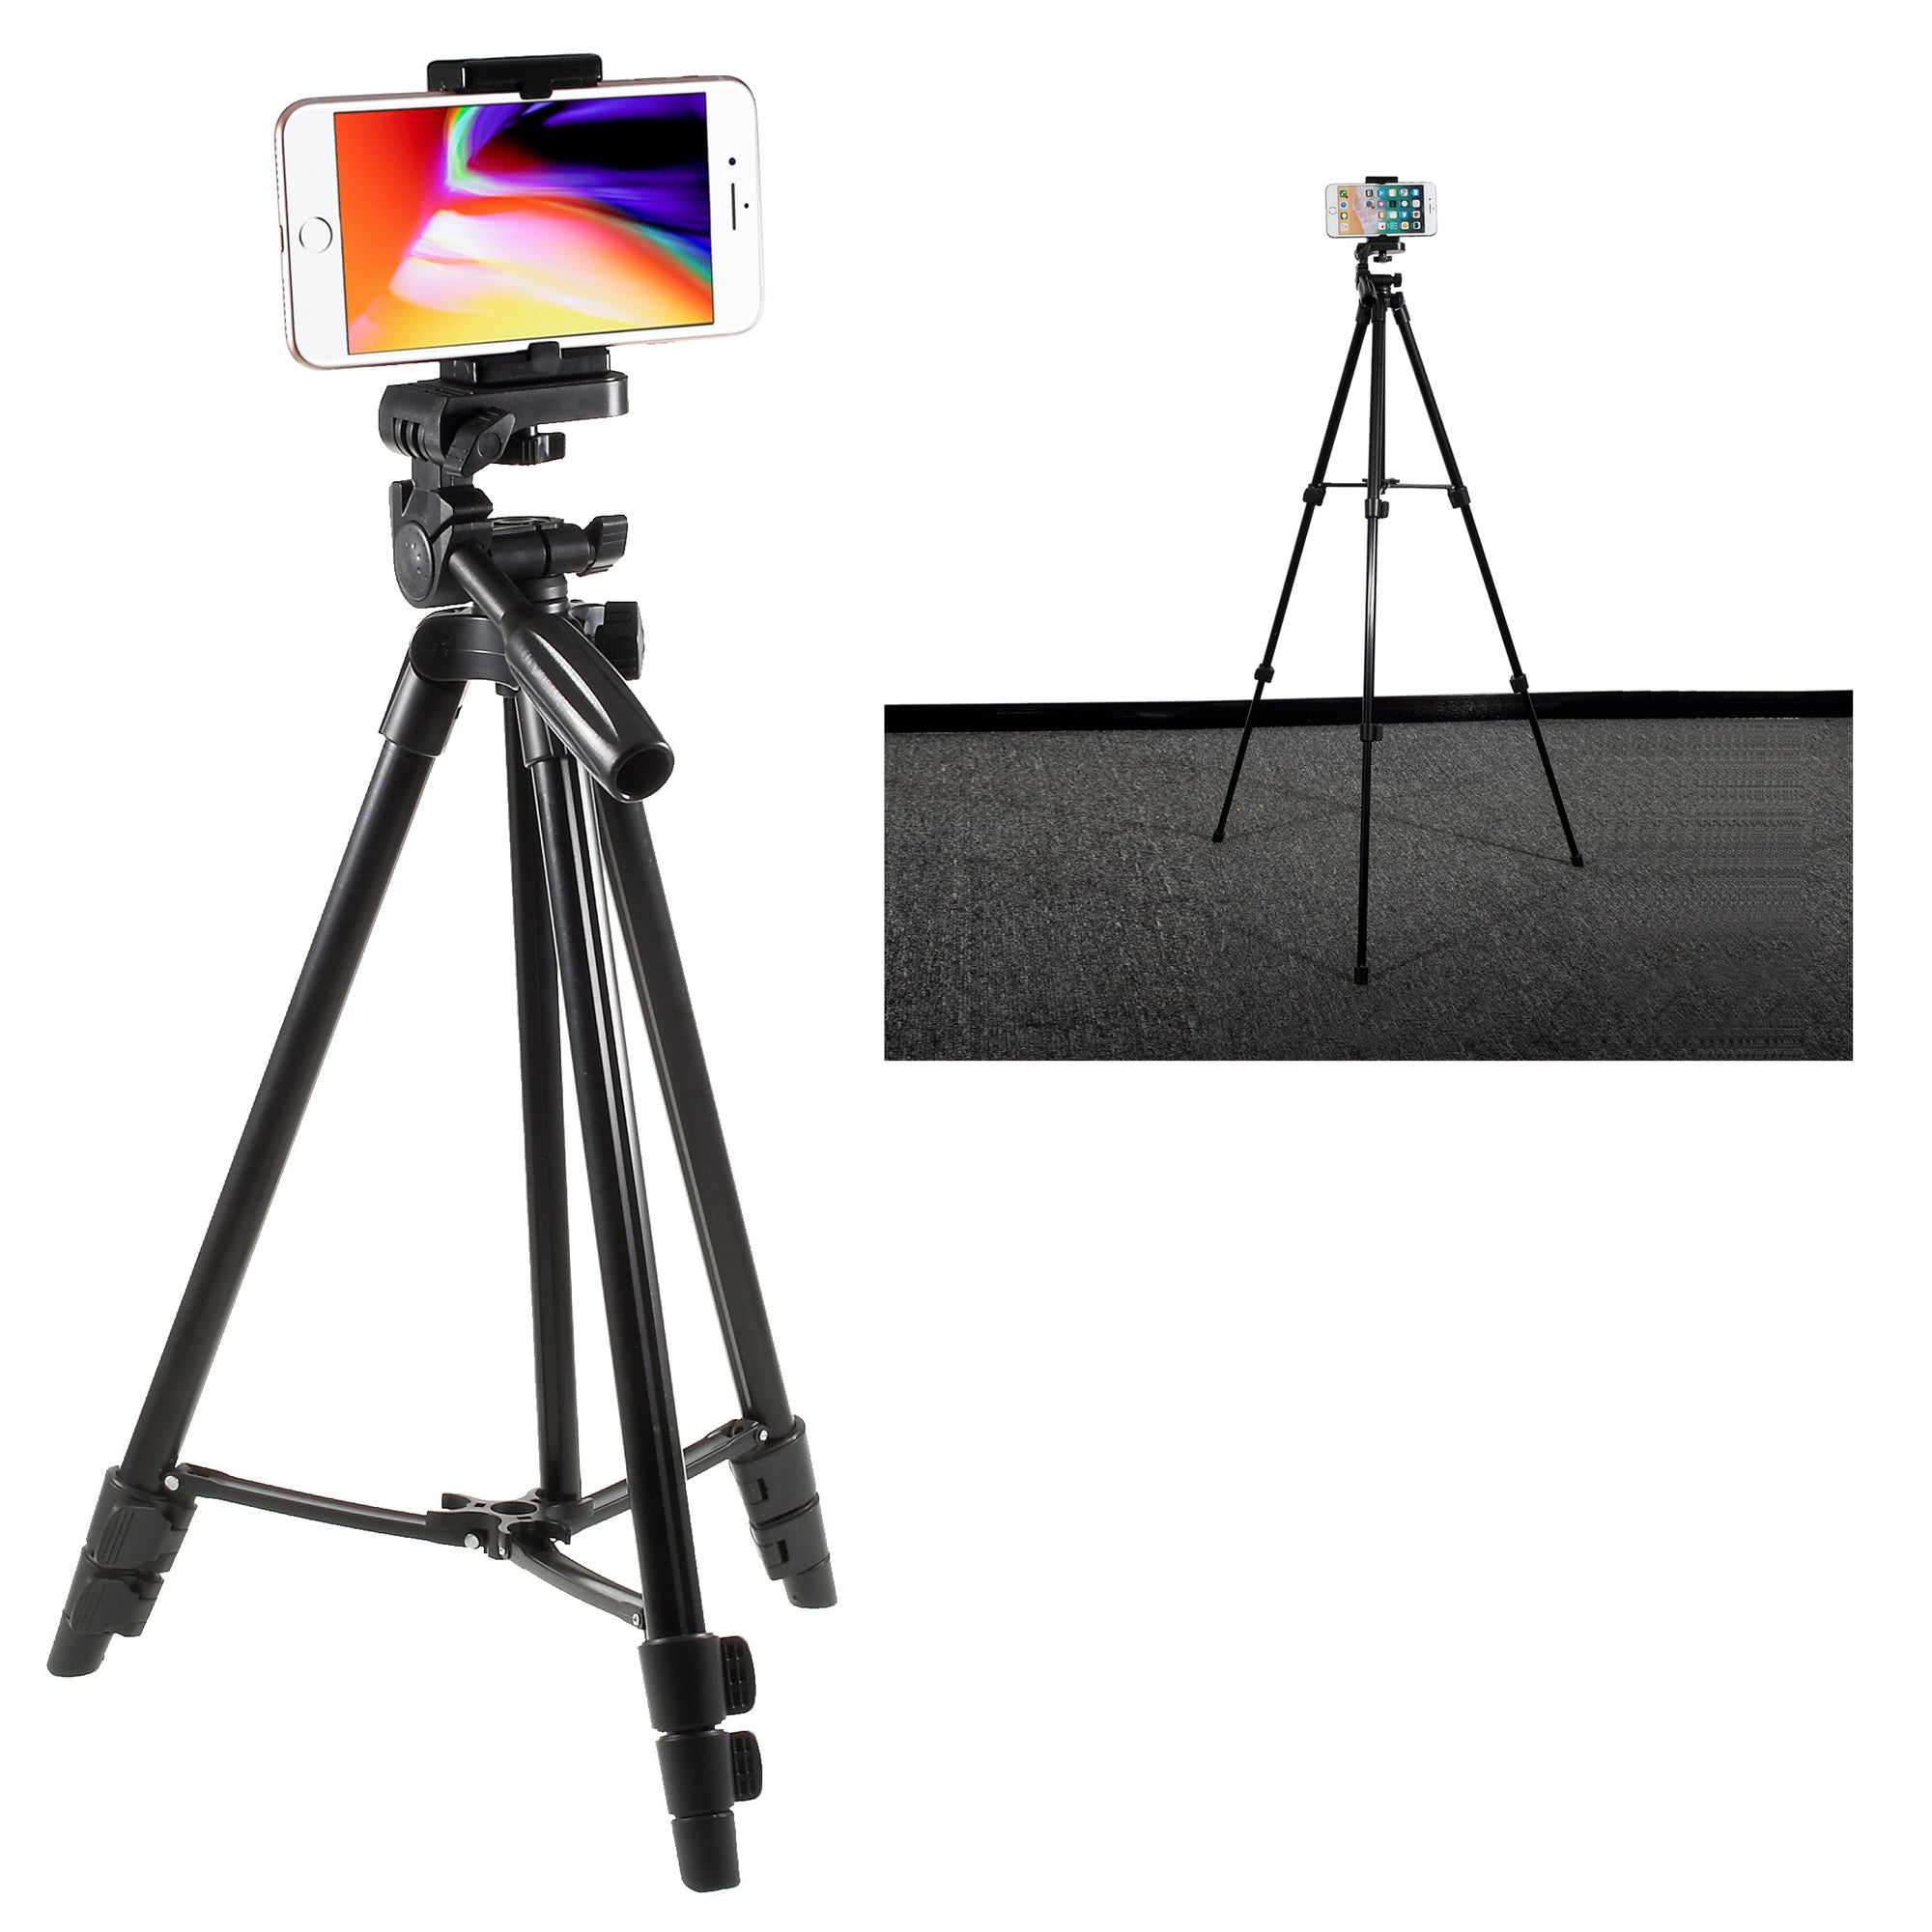 Camera & Mobile Phone Extendable Tripod with Universal Smartphone Holder Mount